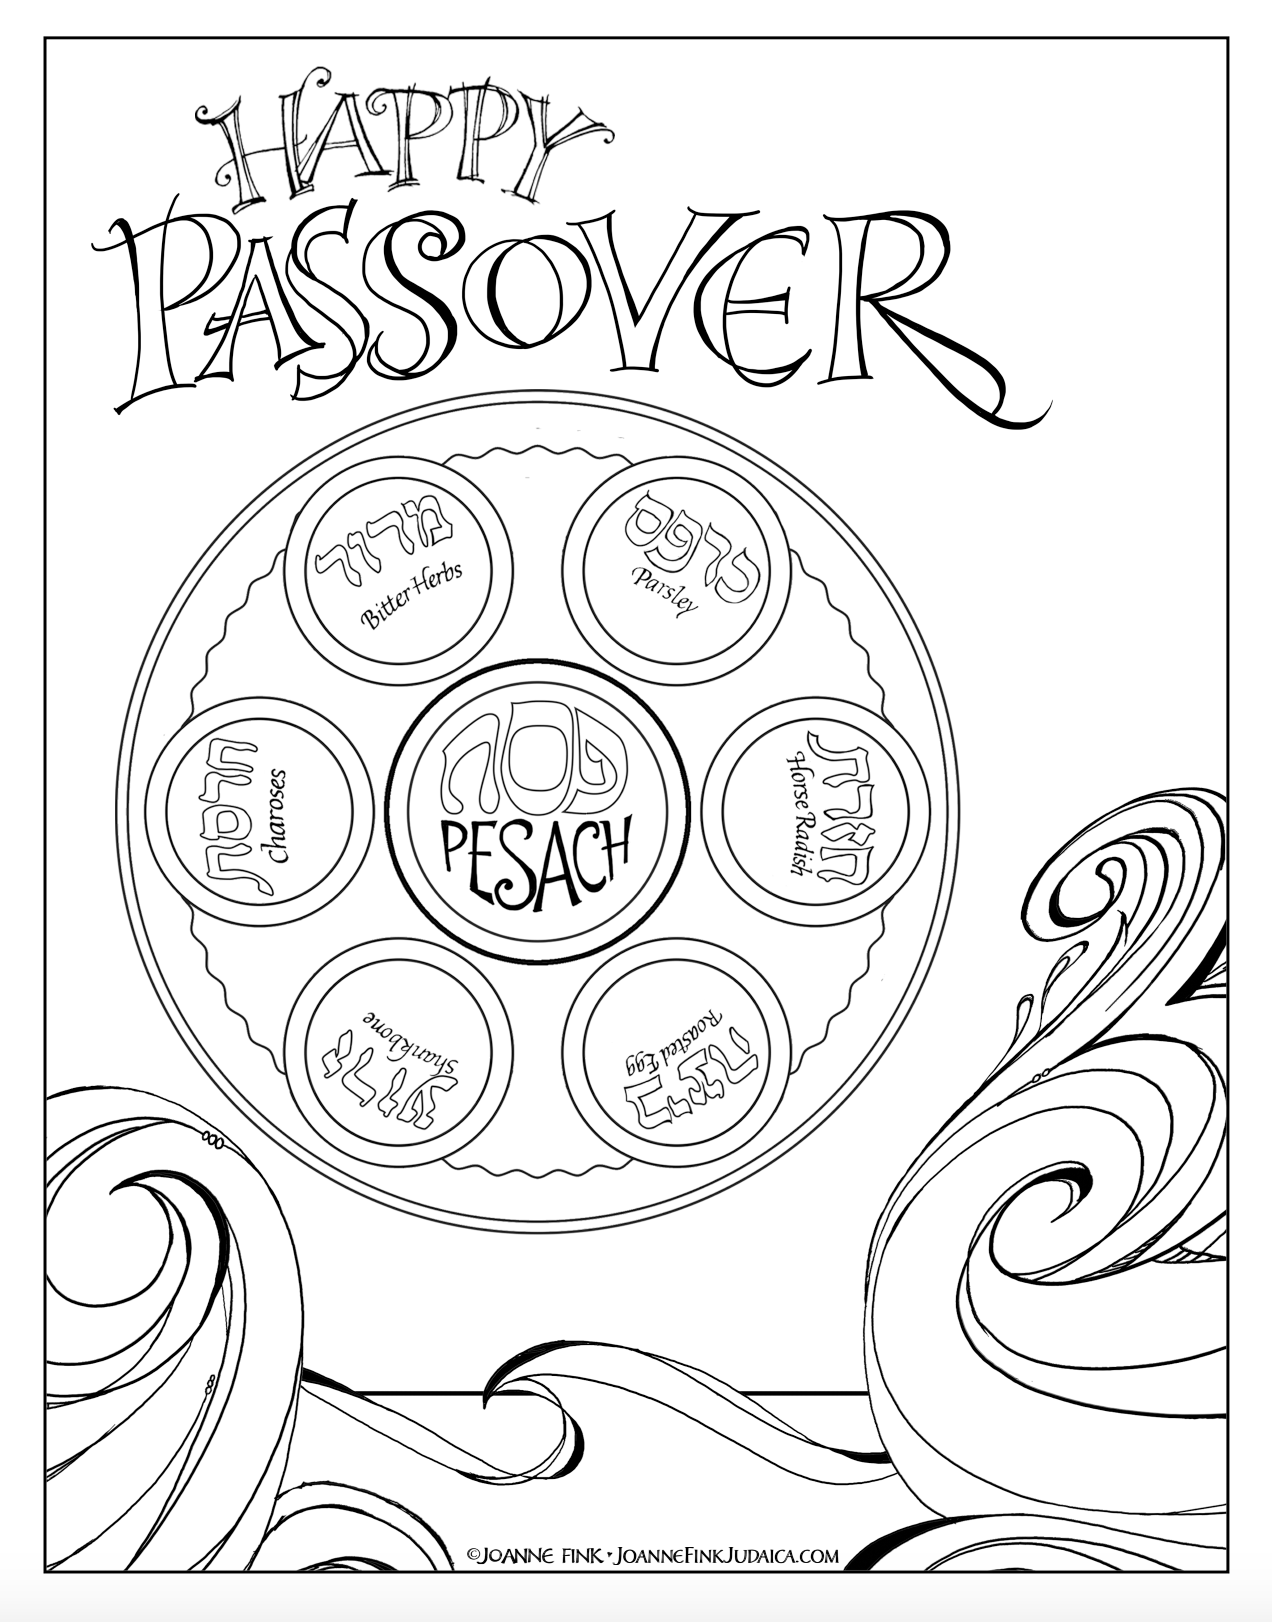 downloadable-passover-prayer-and-coloring-pages